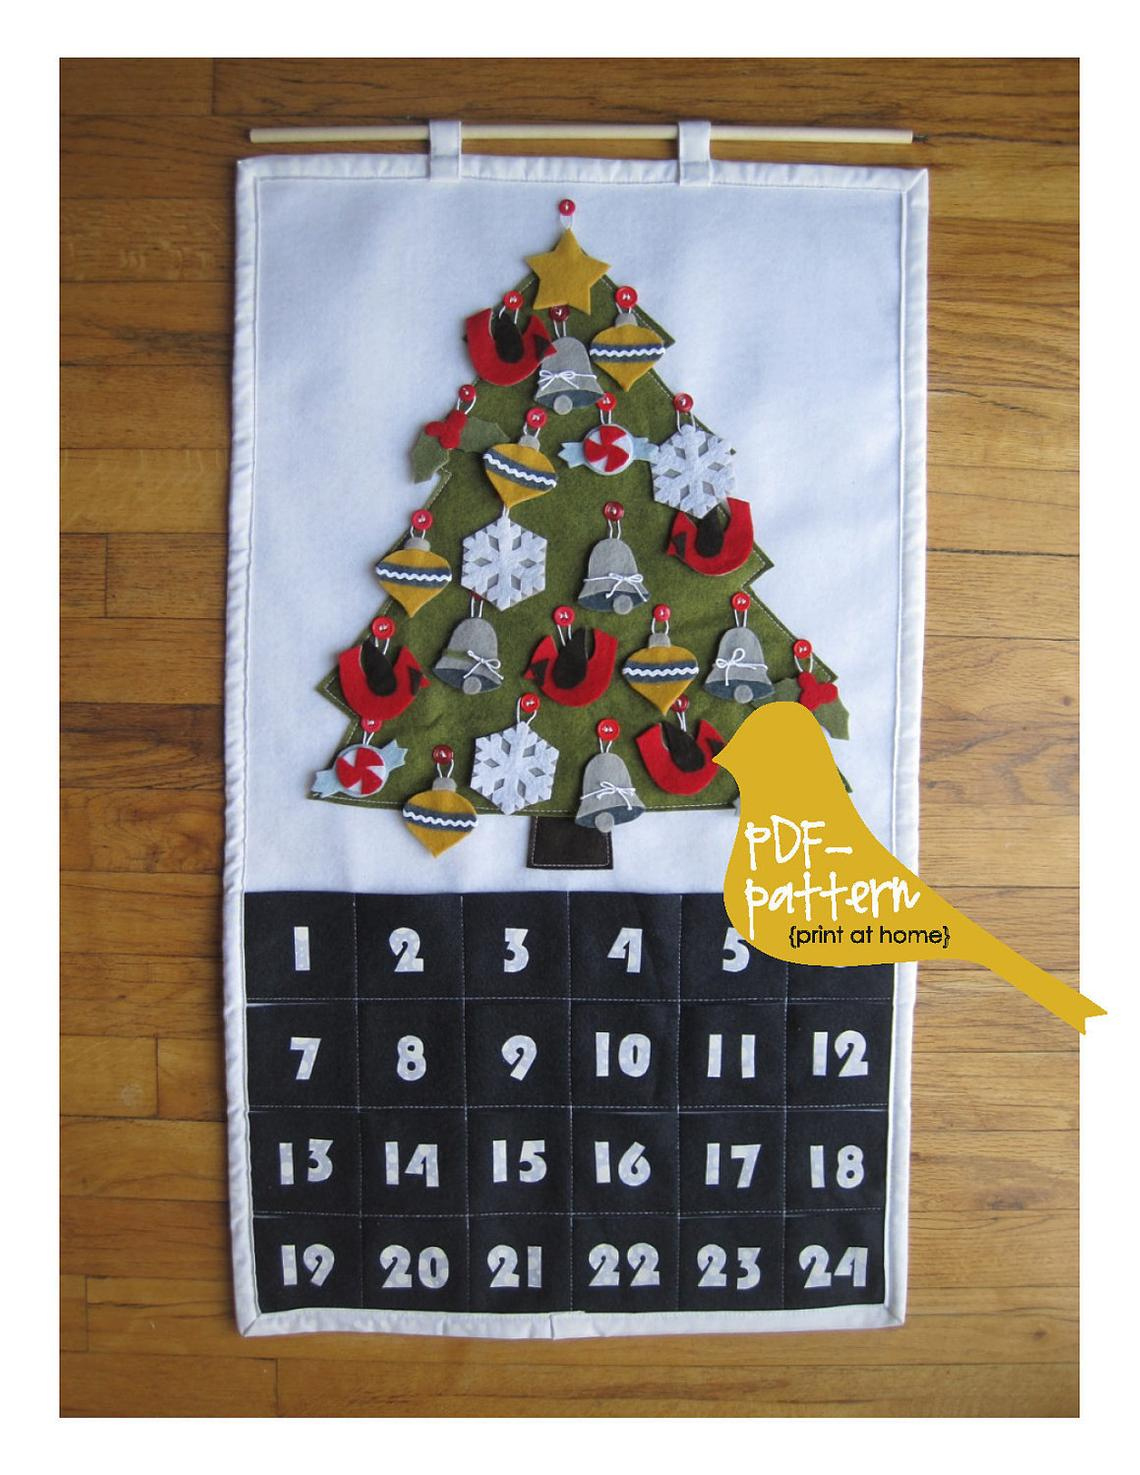 Advent Calendar Sewing Patterns For Advent Calendars Do.you.count Up Or Down